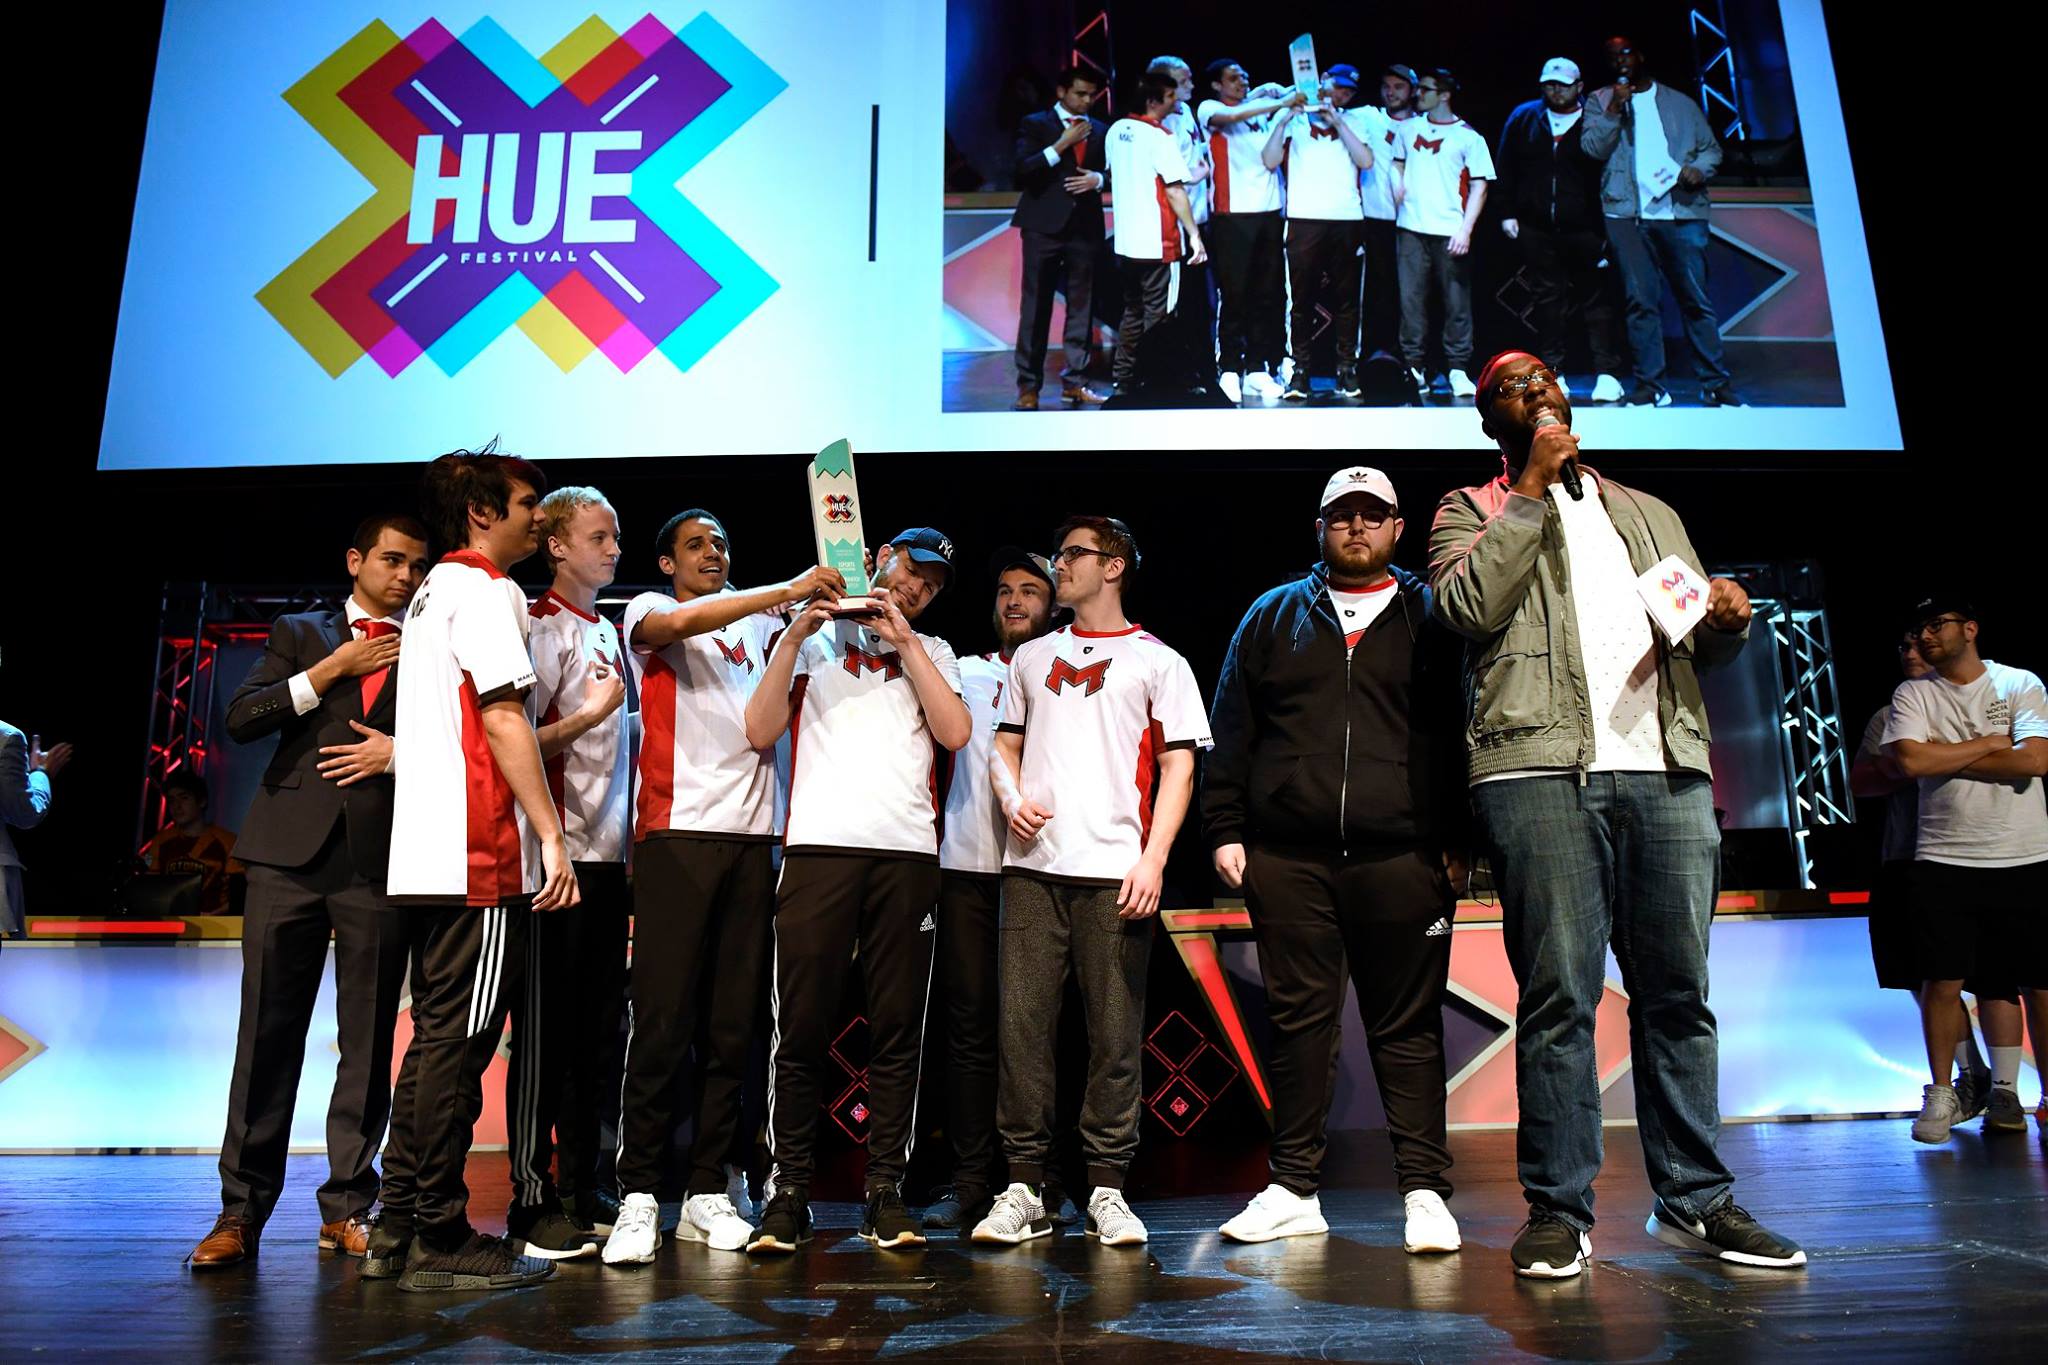 Awarding the HUE Festival Overwatch Champs, Maryville University